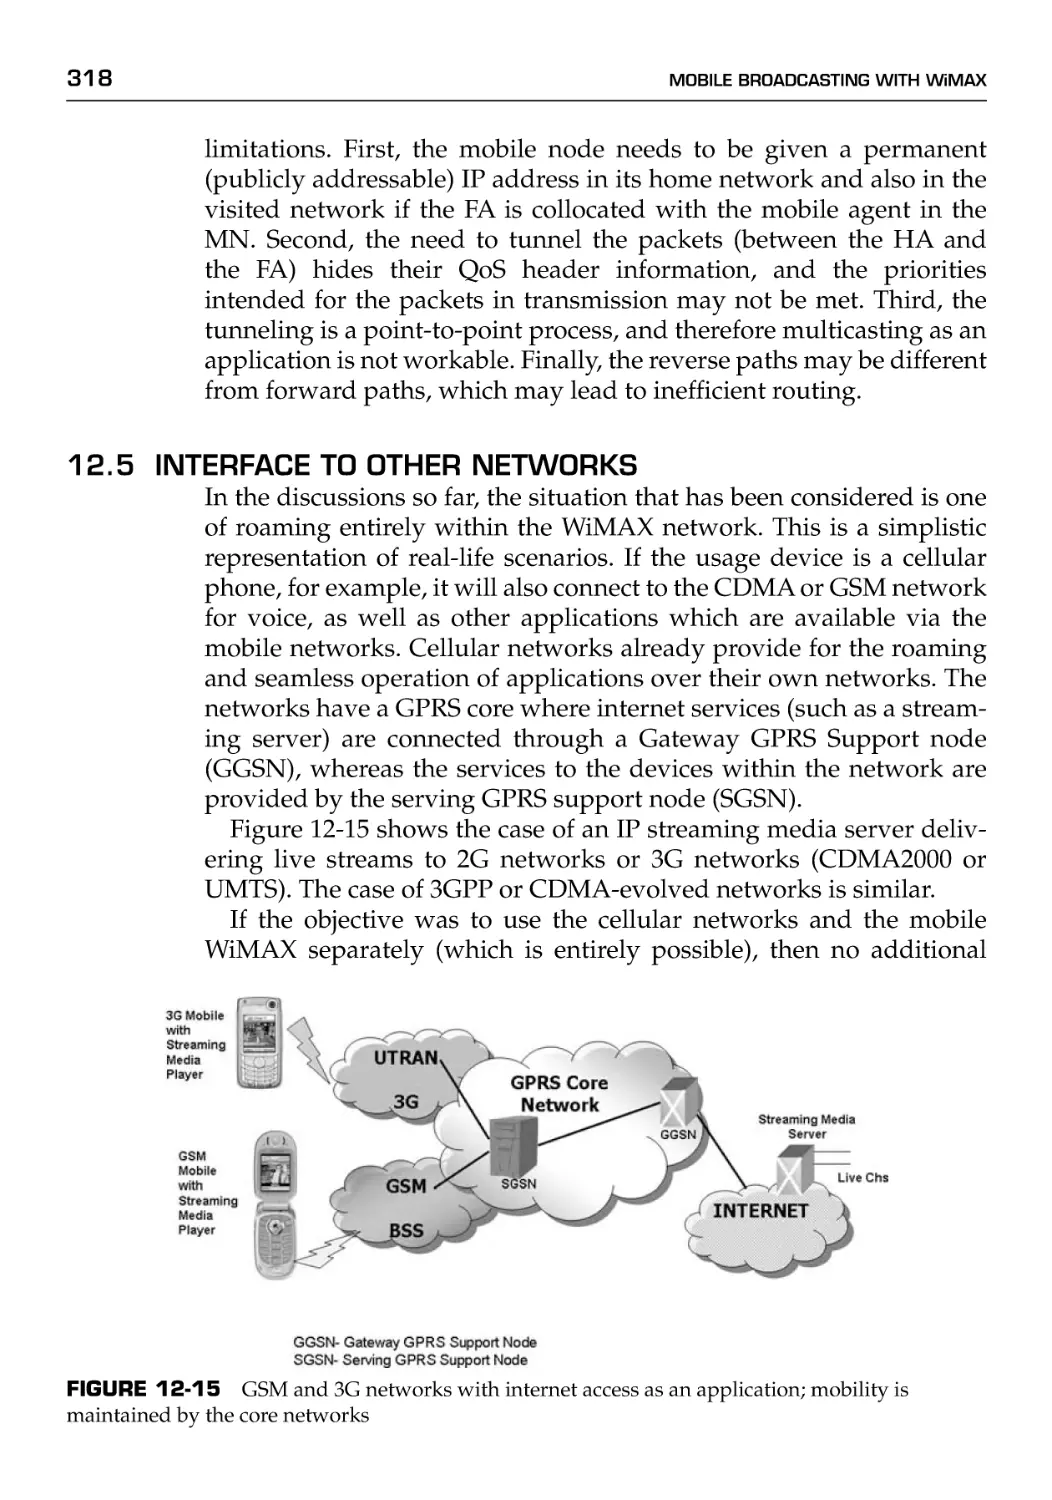 12.5 Interface to Other Networks